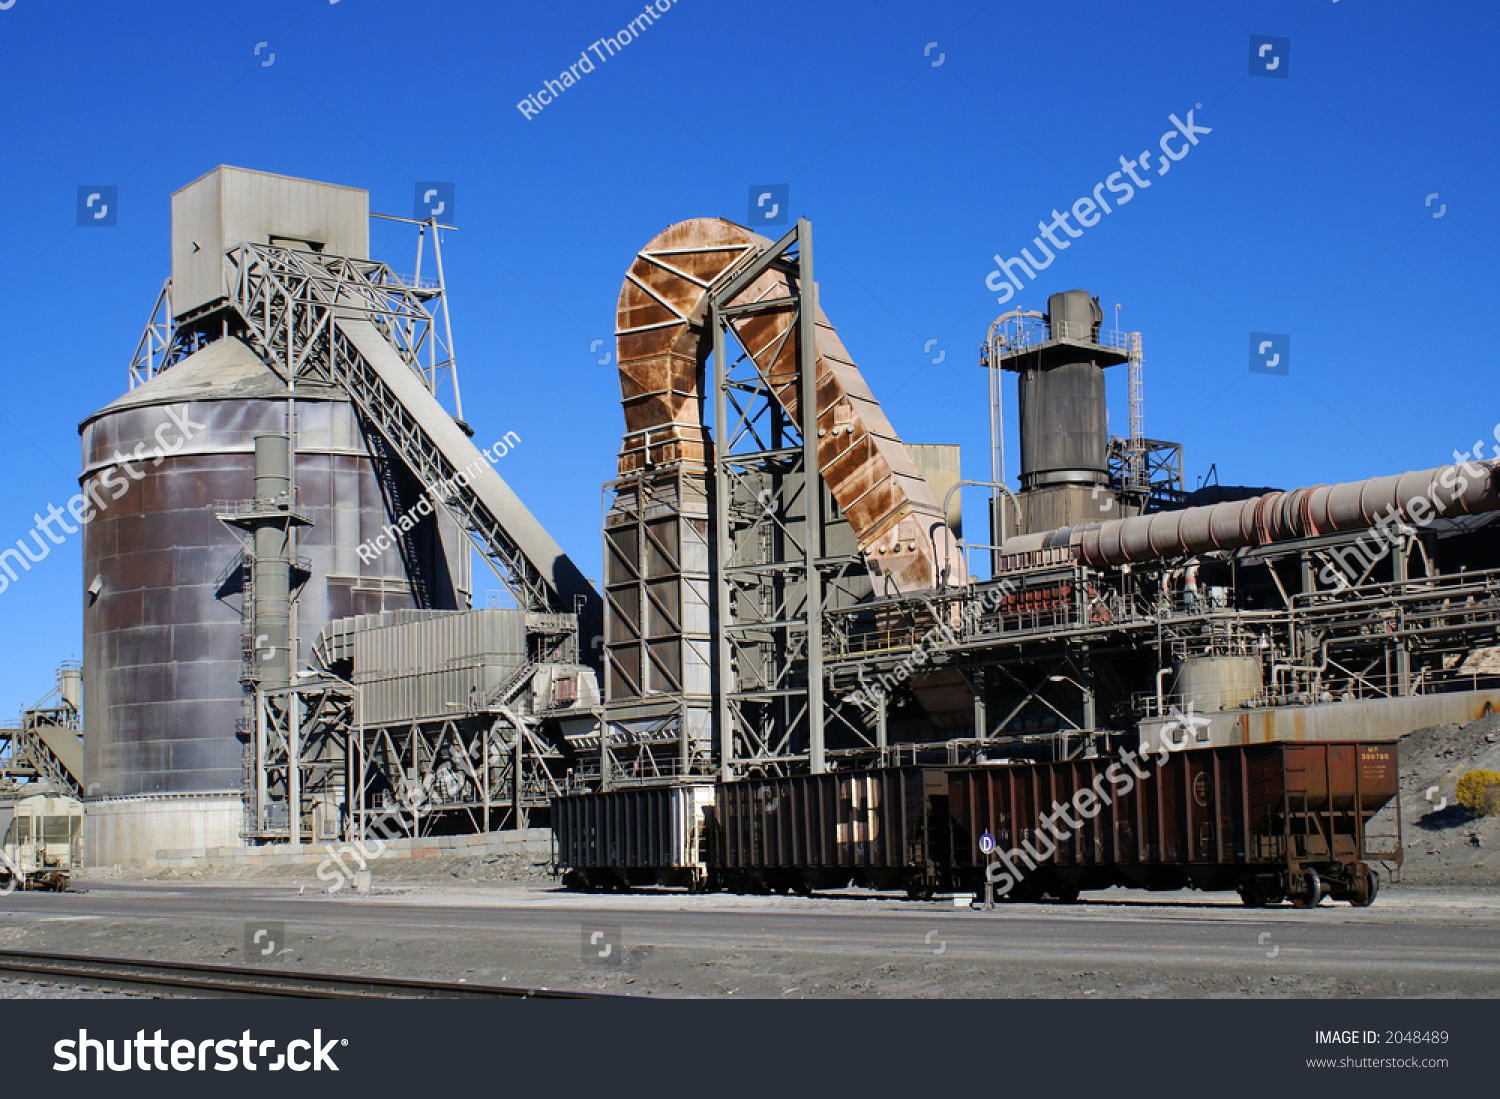 Cement Manufacturing Plant Stock Photo 2048489 - Shutterstock